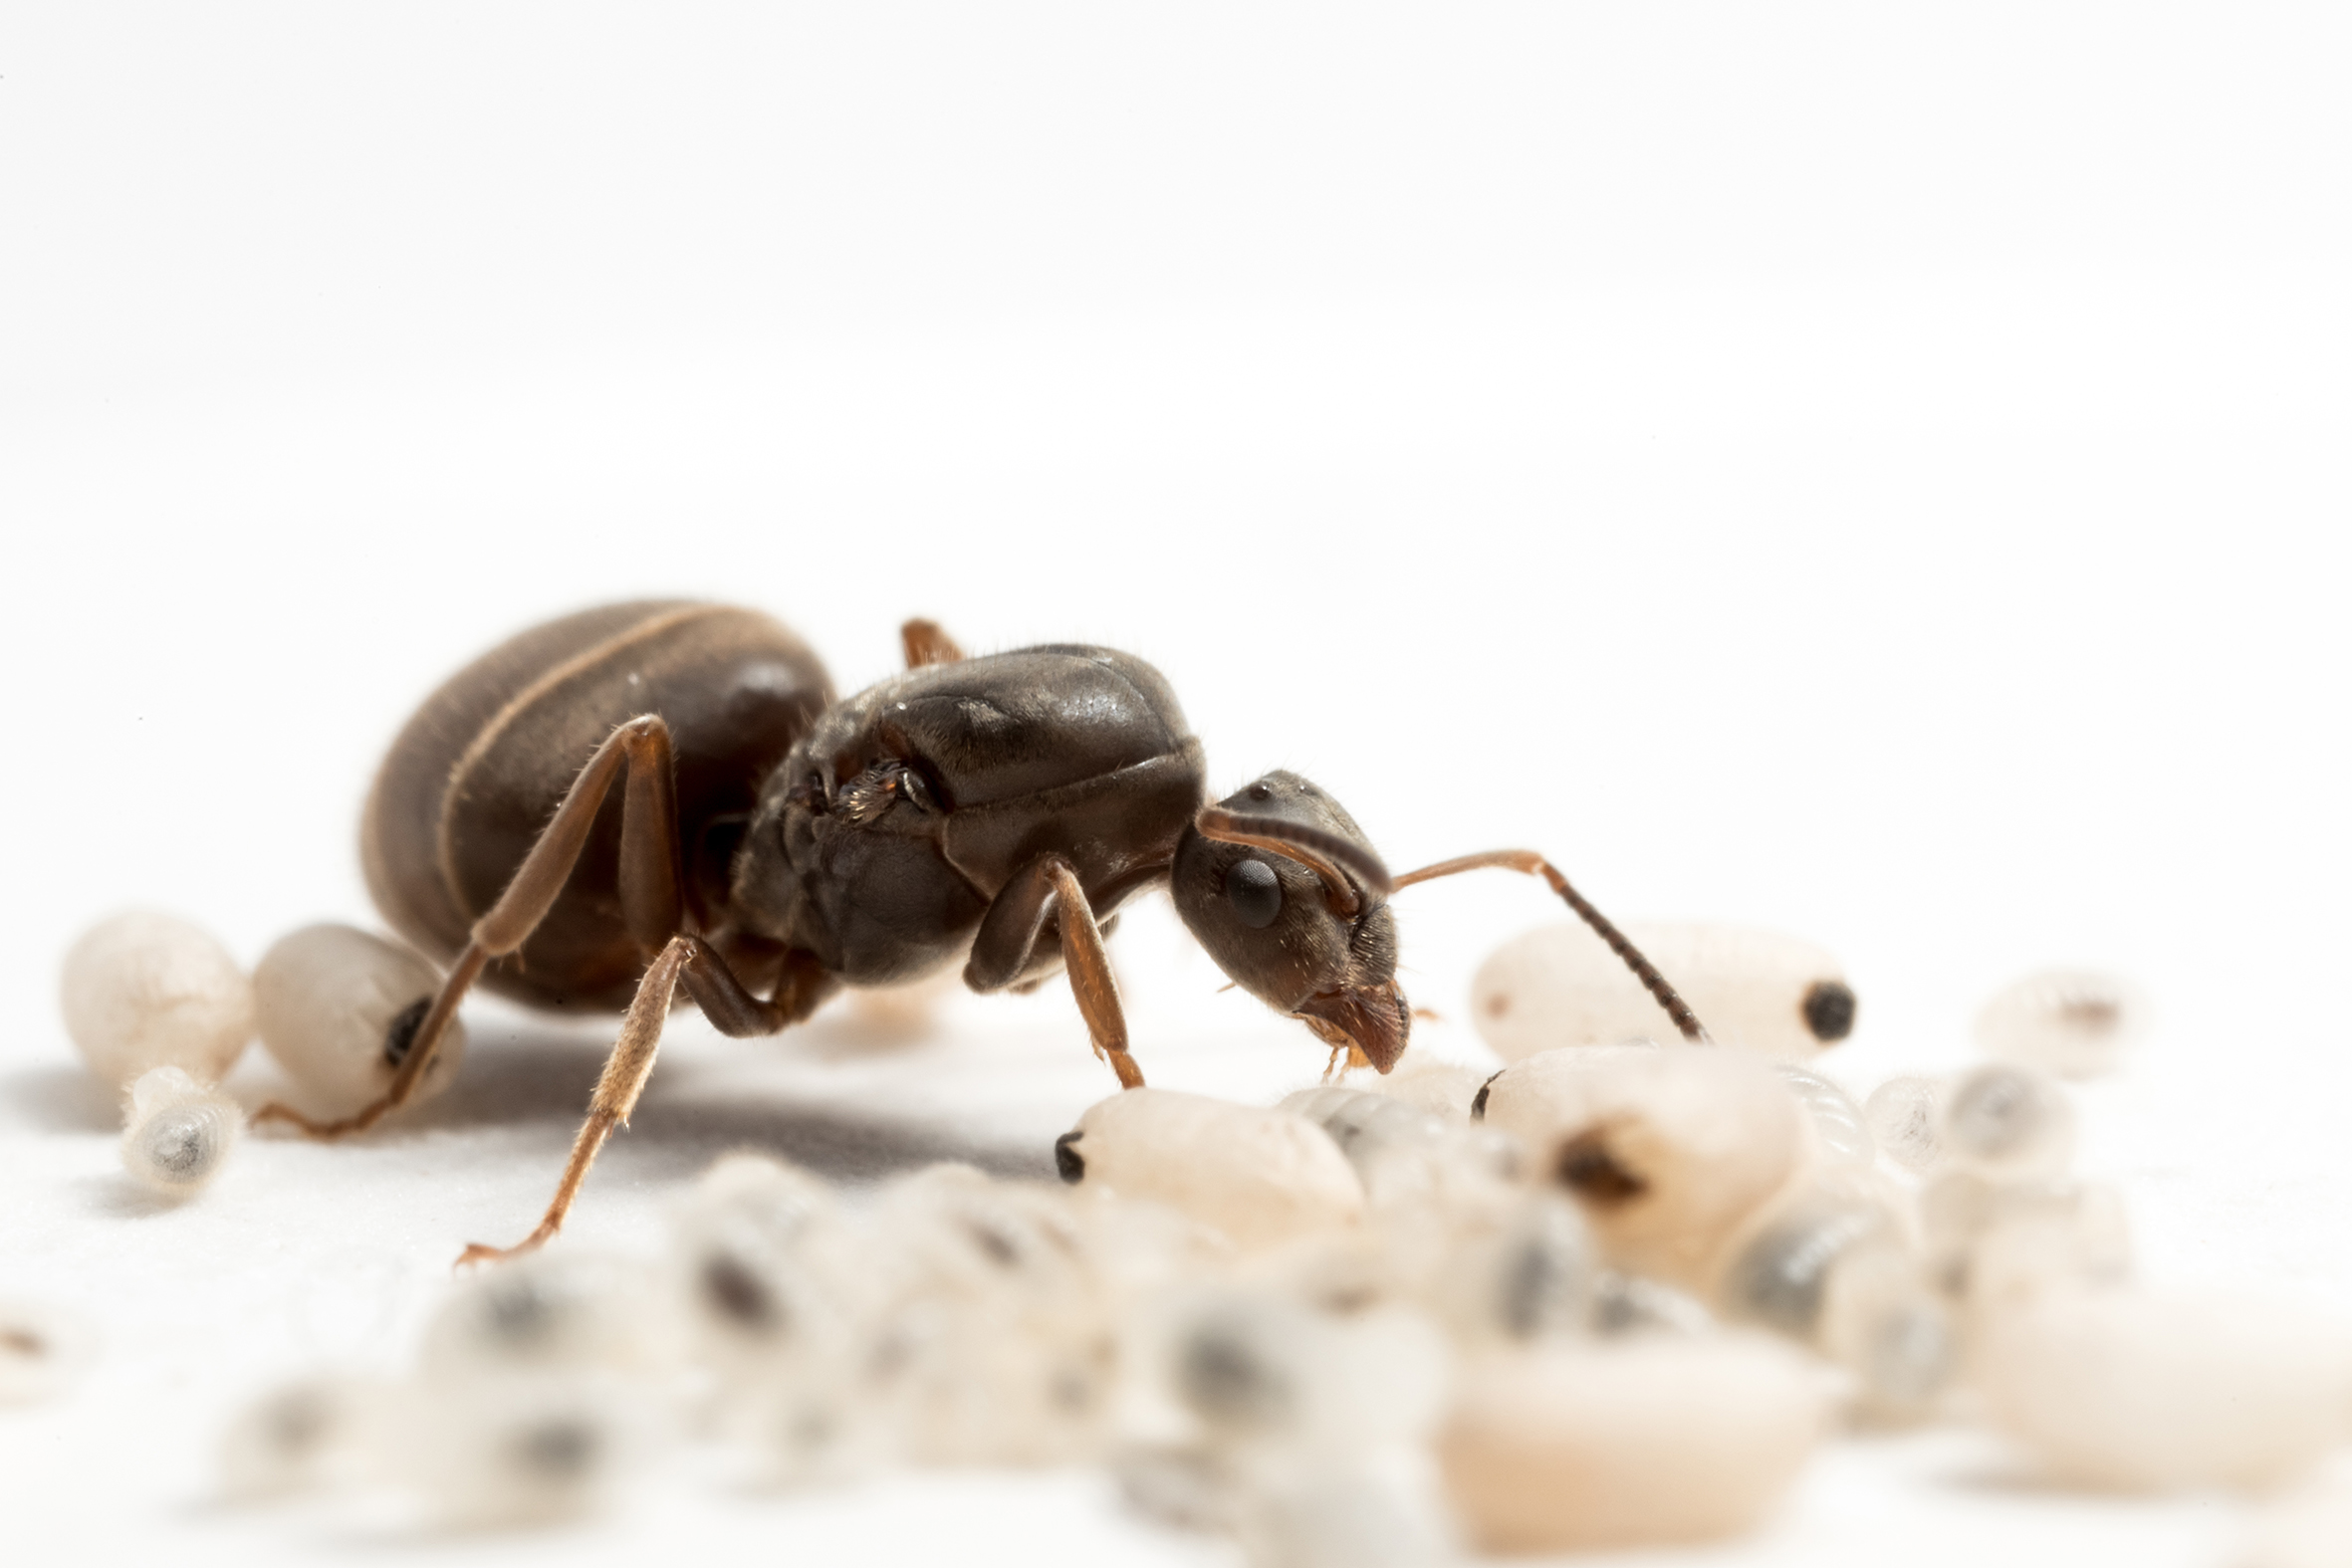 An ant founding queen expressing brood care behavior